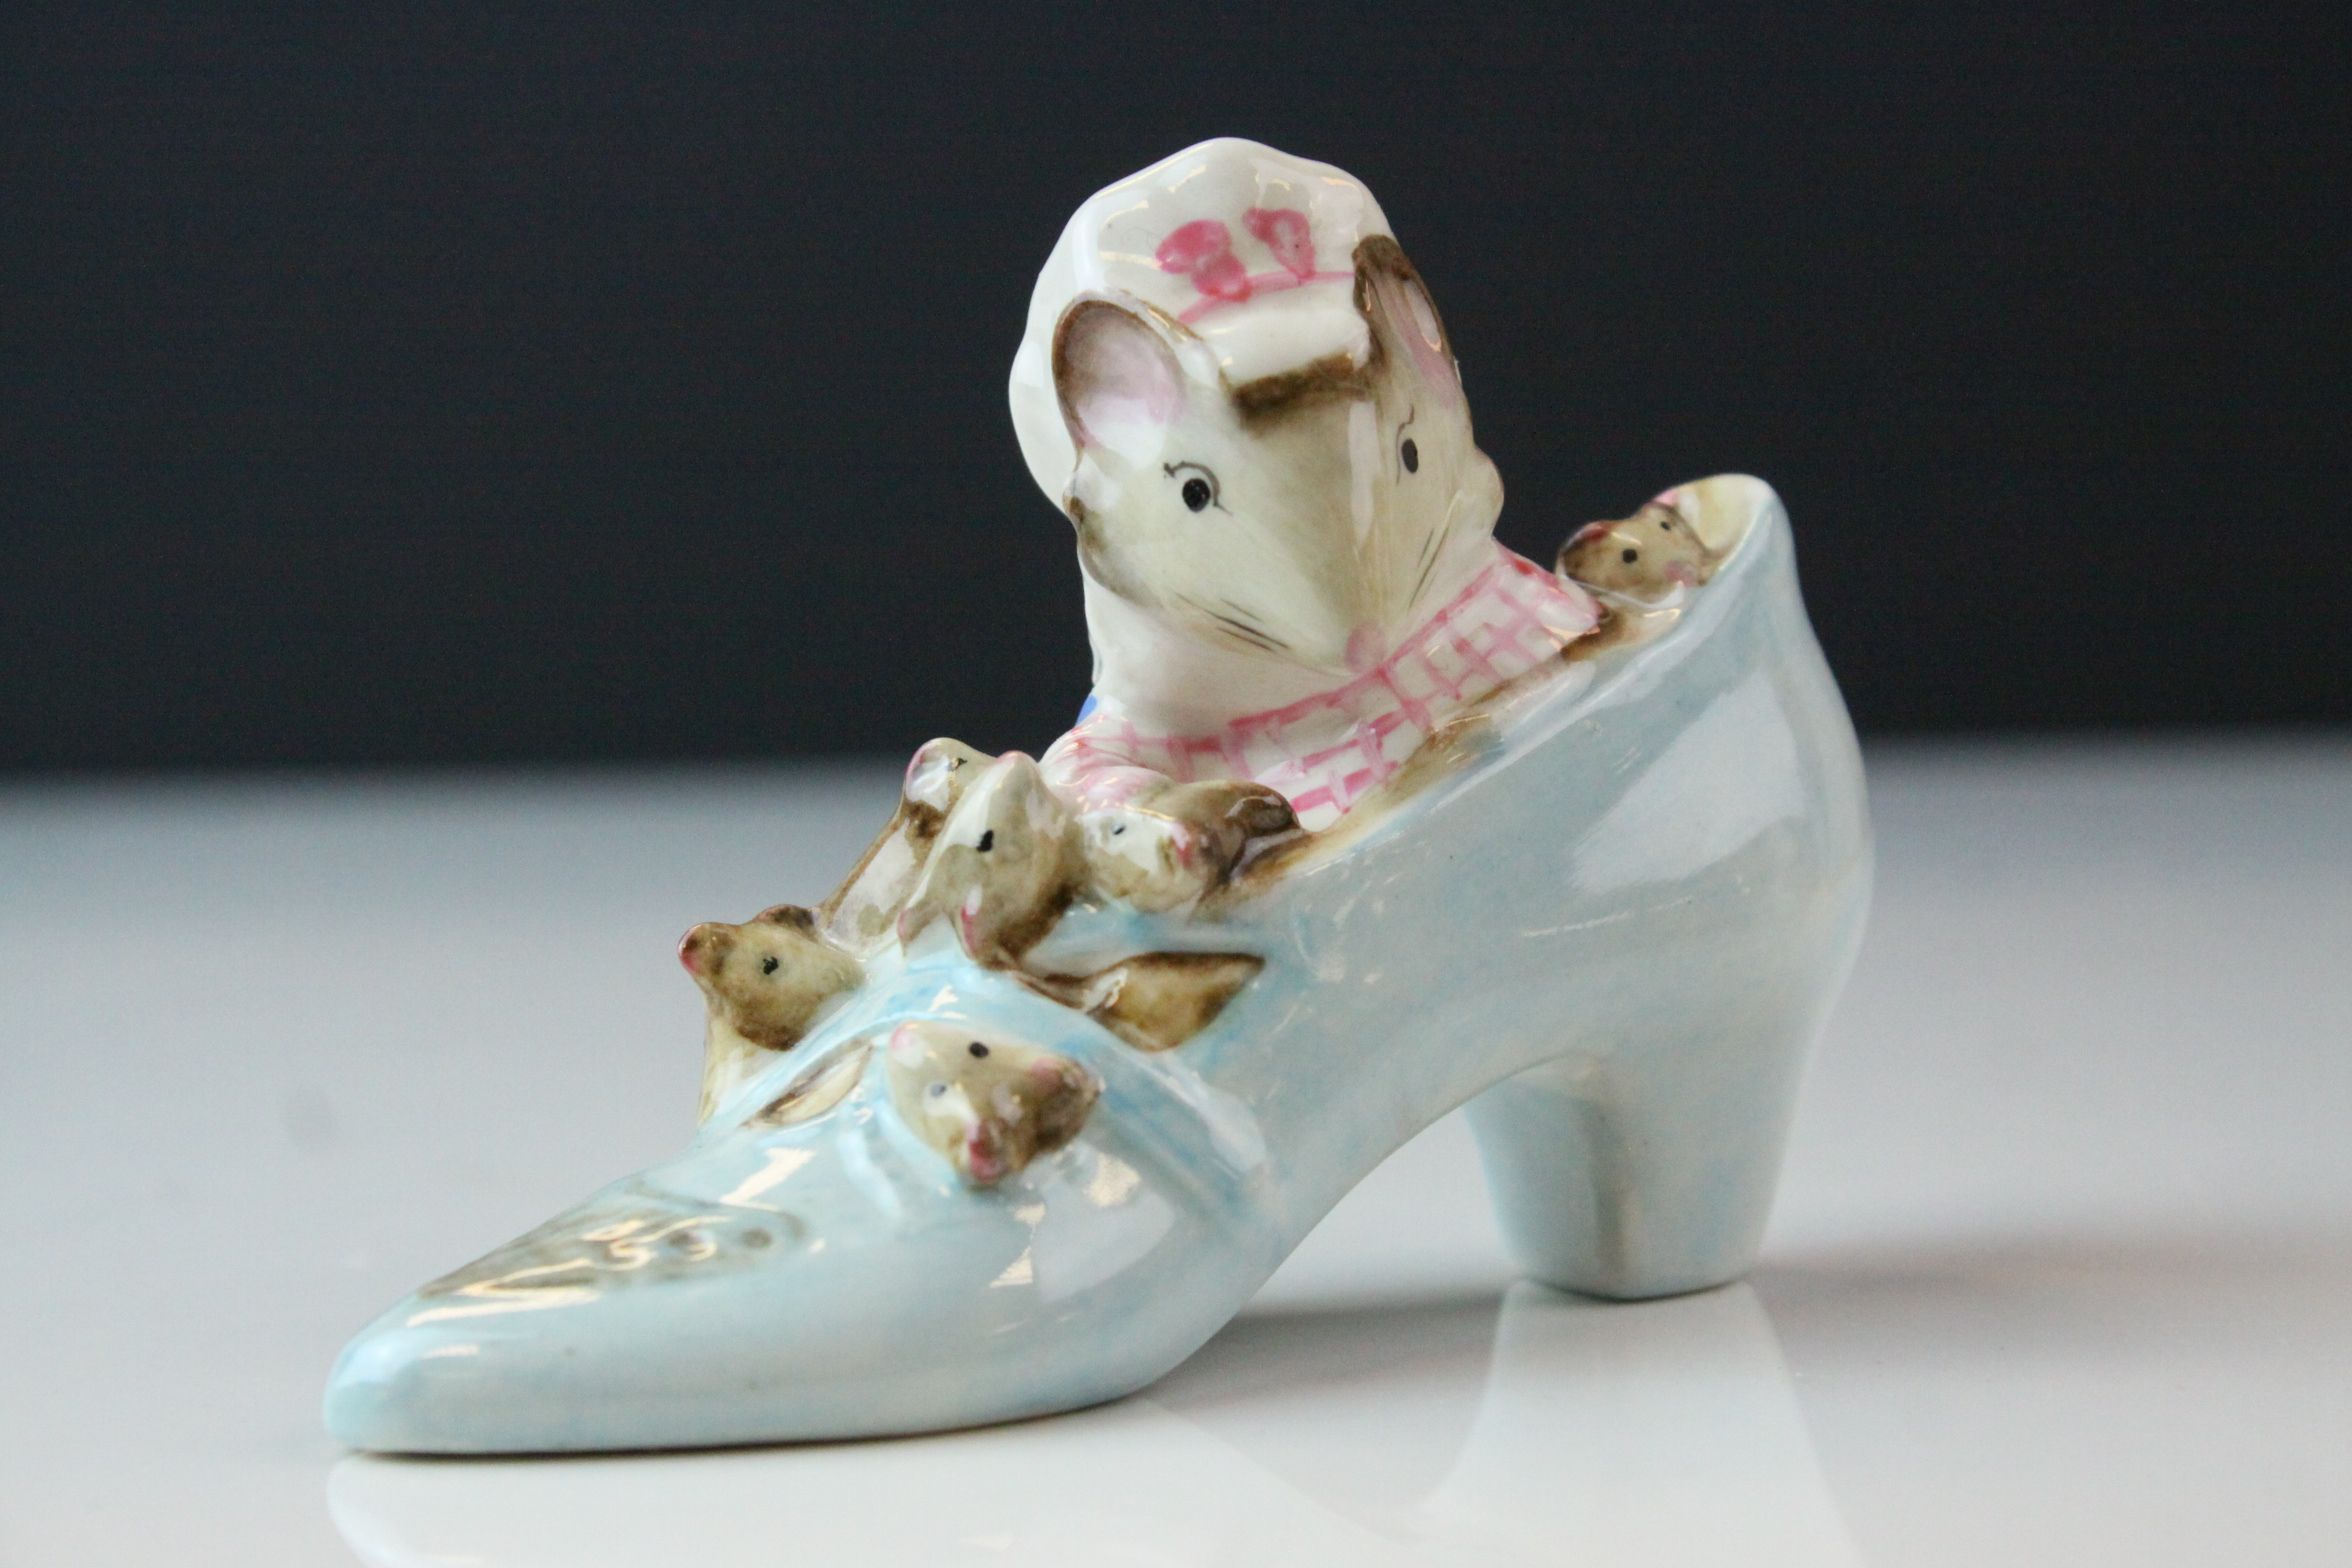 Eleven Beswick Beatrix Potter's Figures including Miss Moppet, Hunca Munca, Flopsy, Mopsy and - Image 21 of 35